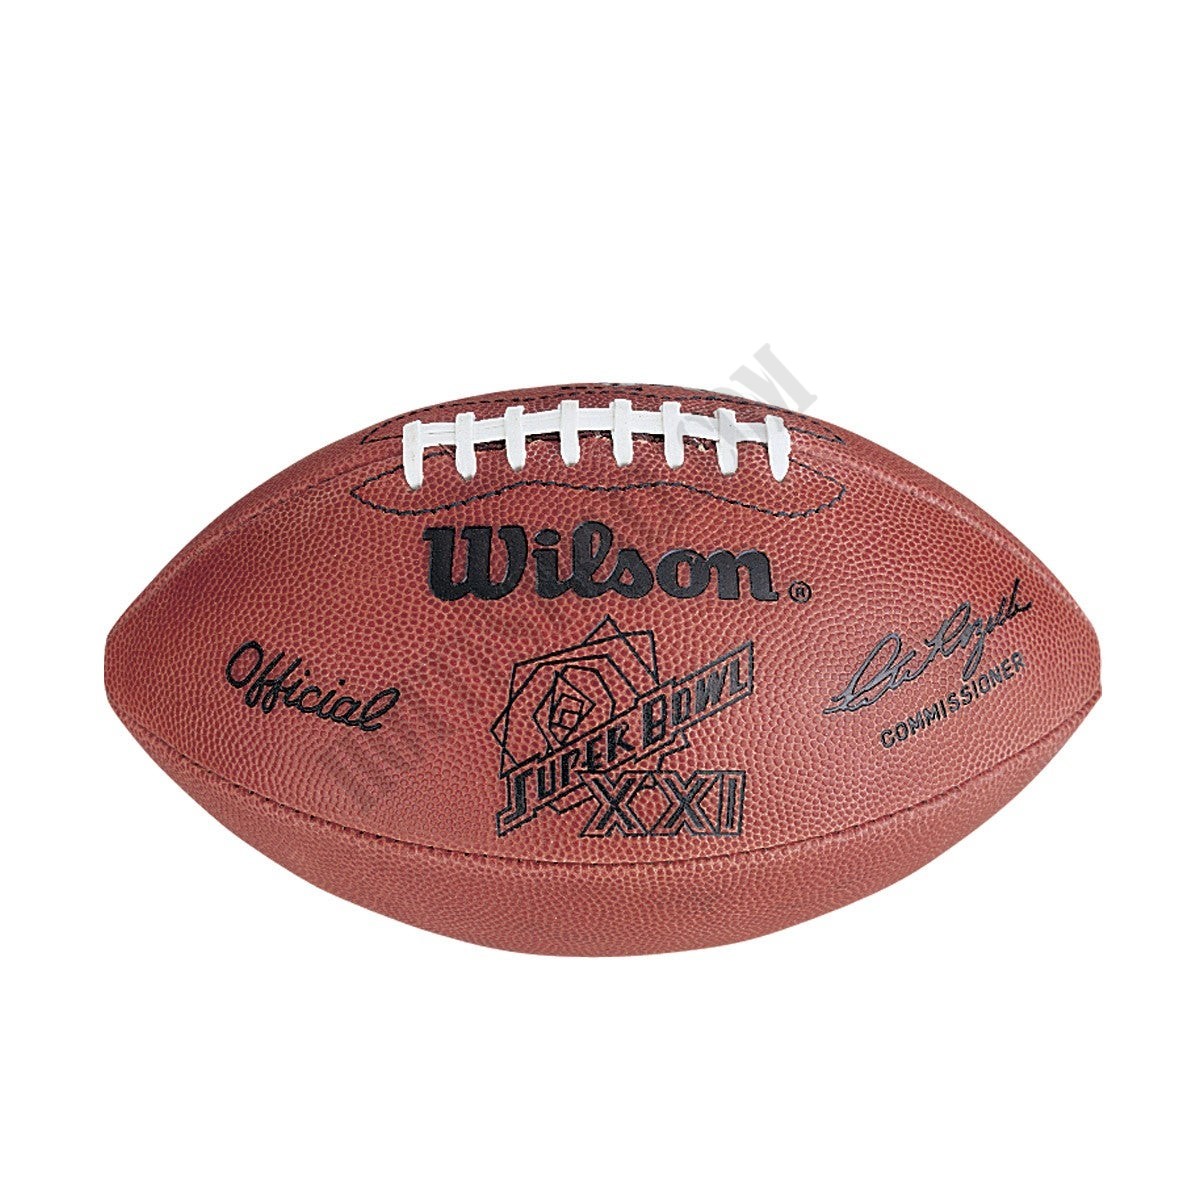 Super Bowl XXI Game Football - New York Giants ● Wilson Promotions - -0